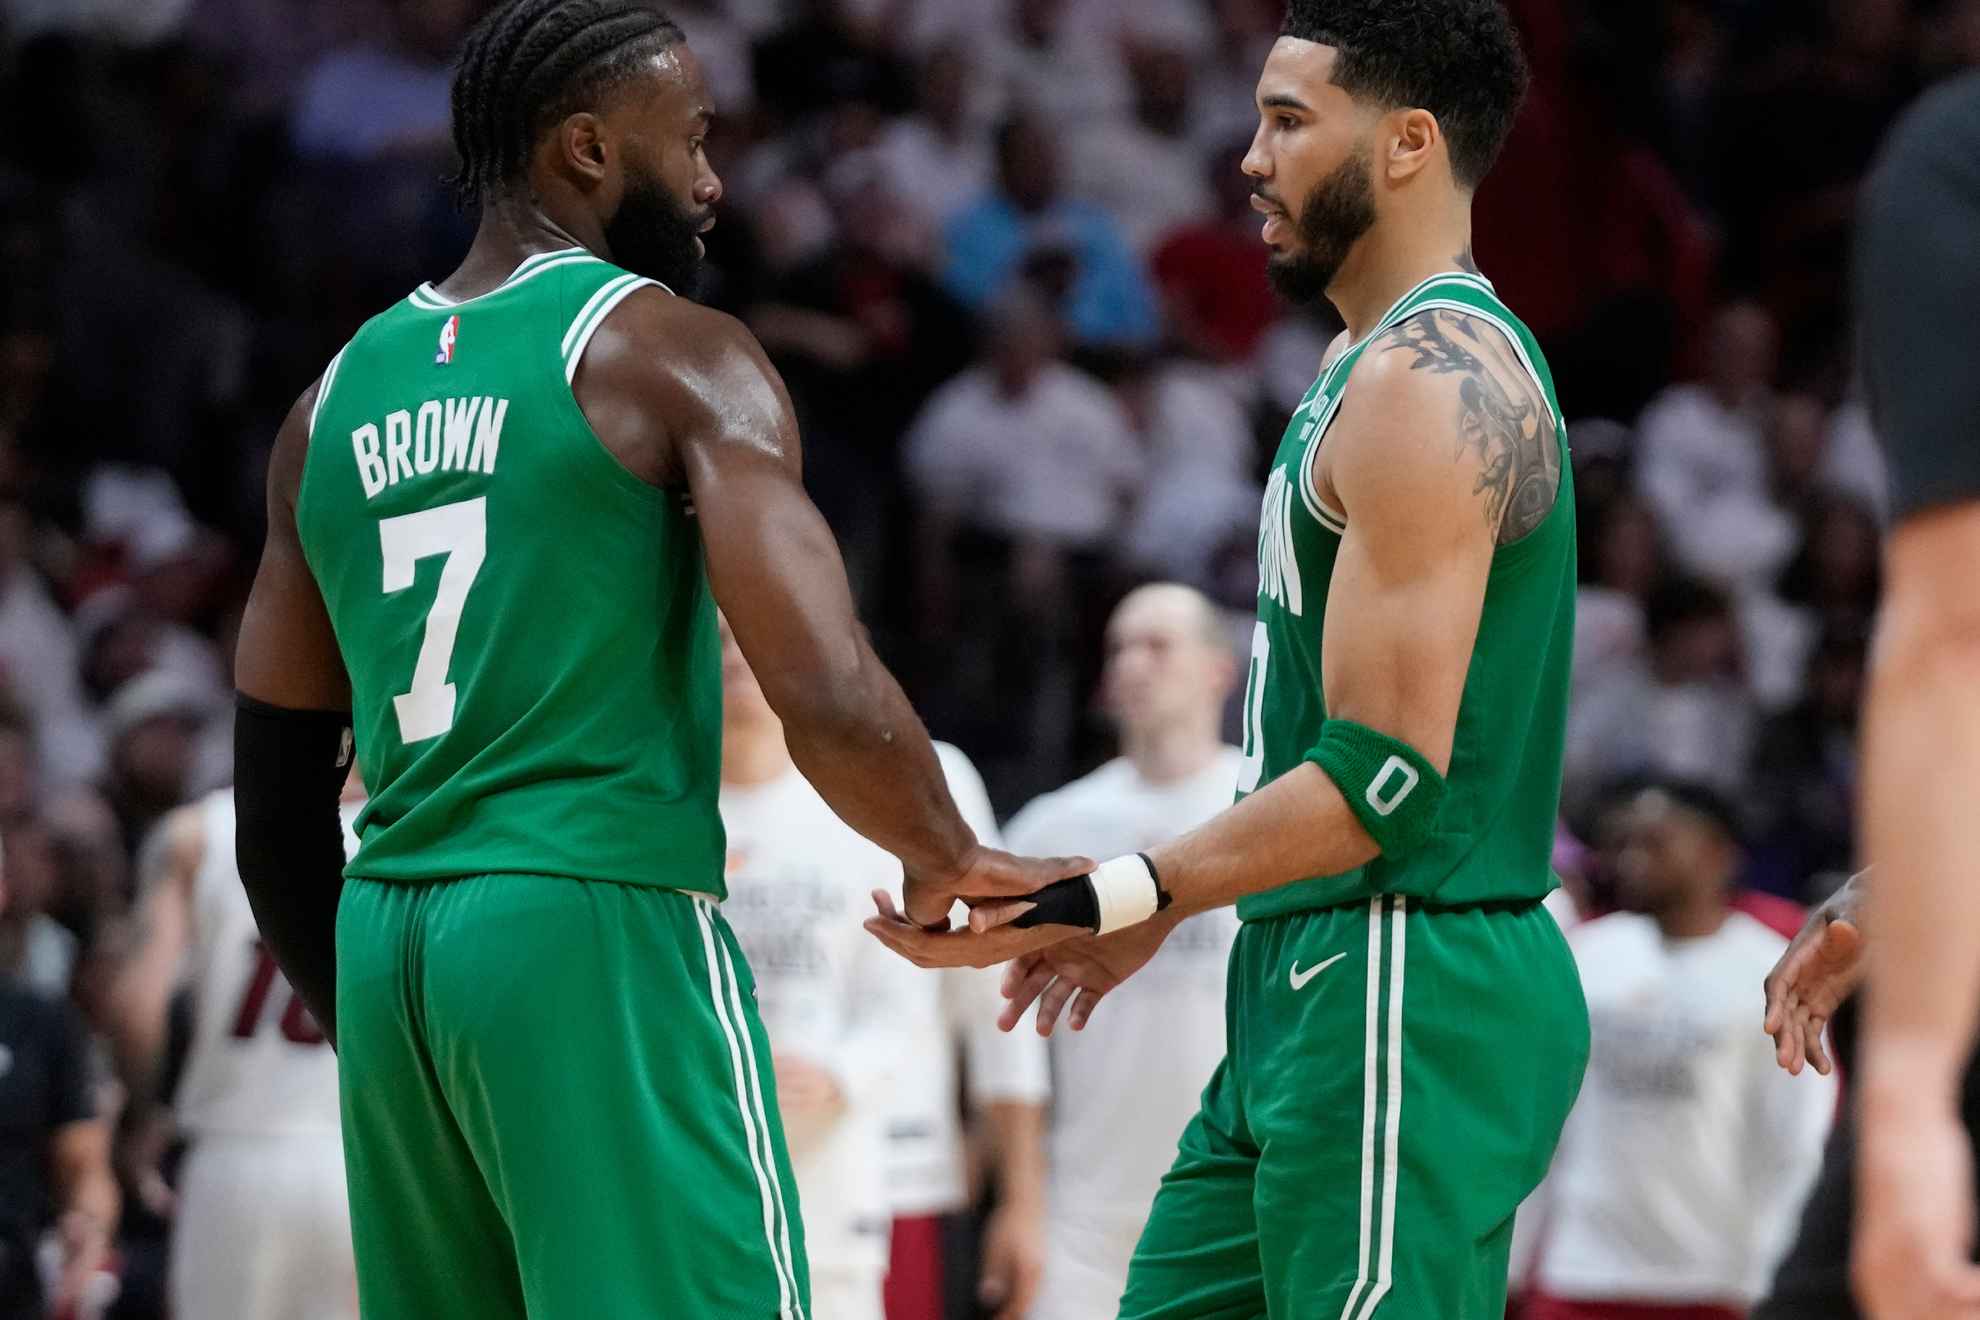 Boston's dynamic duo came through in Game 4.